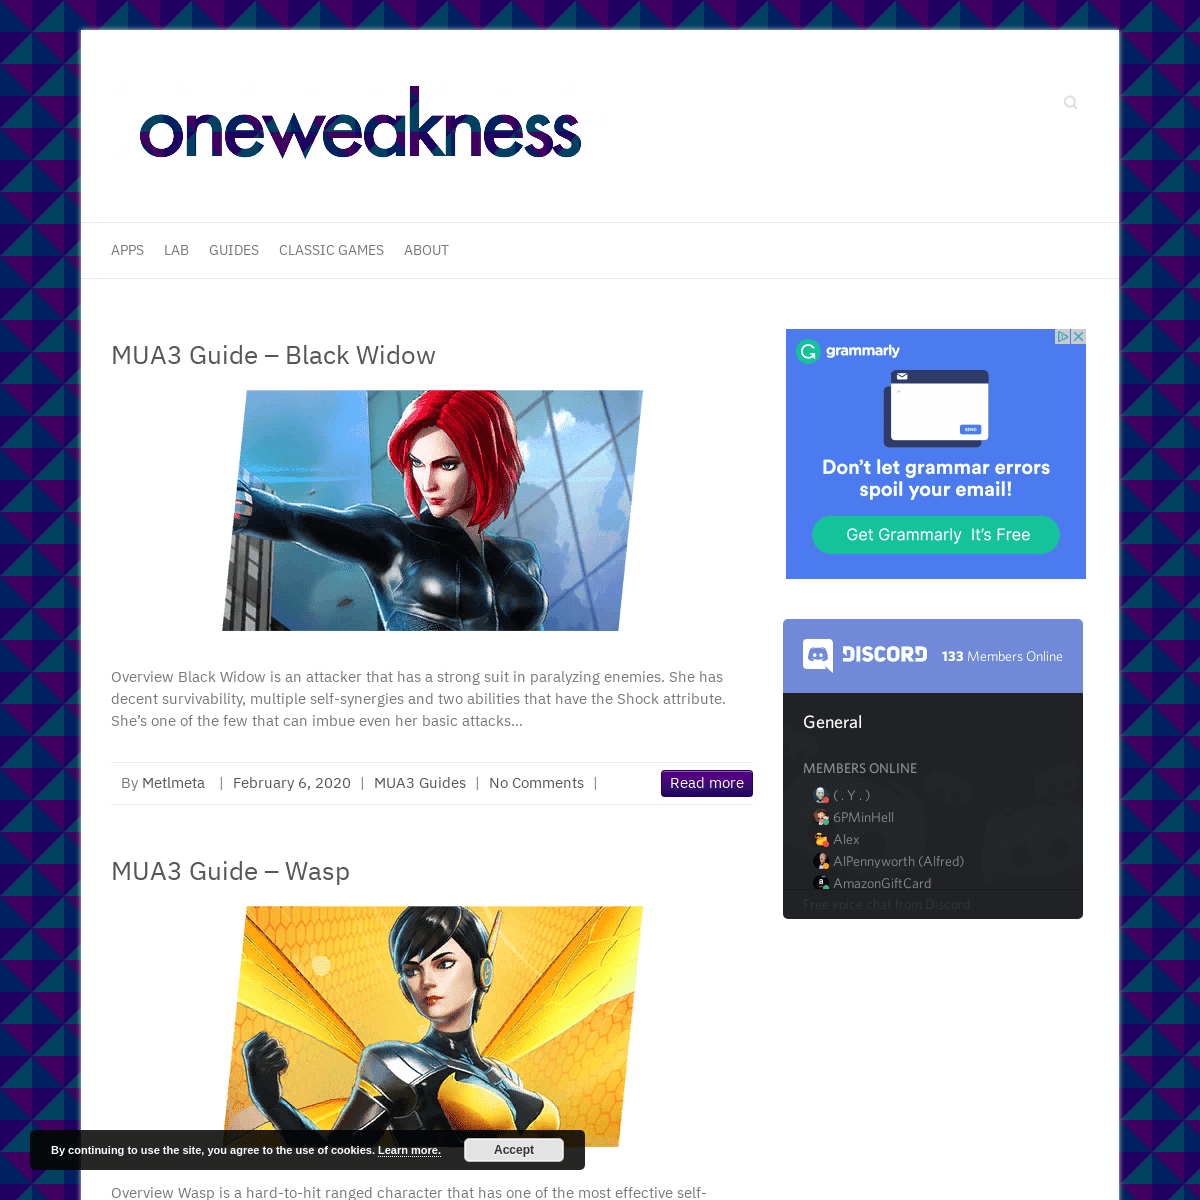 A complete backup of oneweakness.com